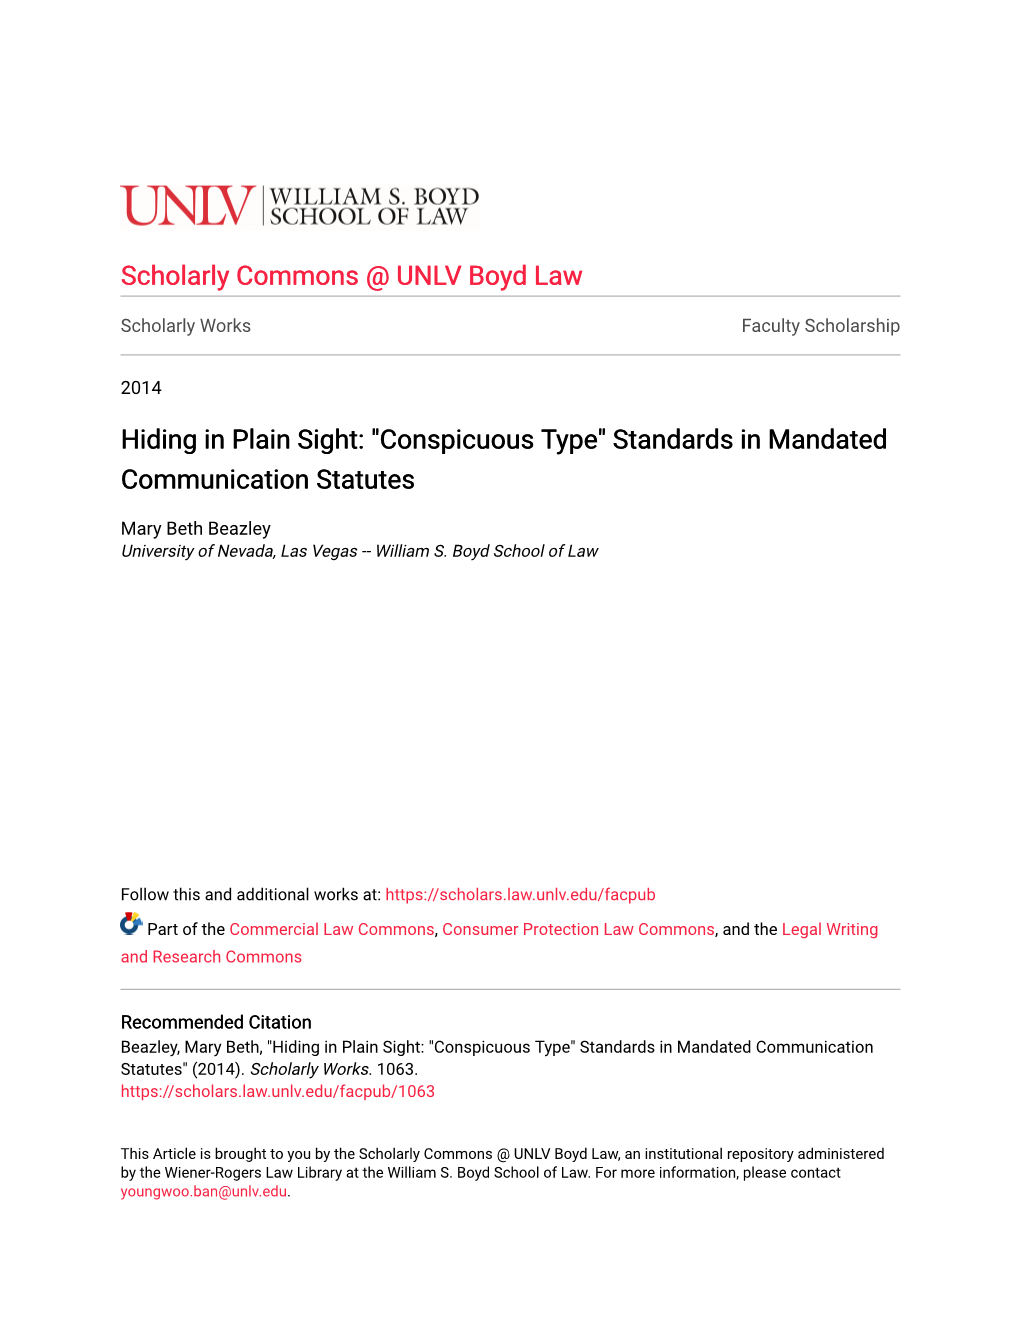 "Conspicuous Type" Standards in Mandated Communication Statutes